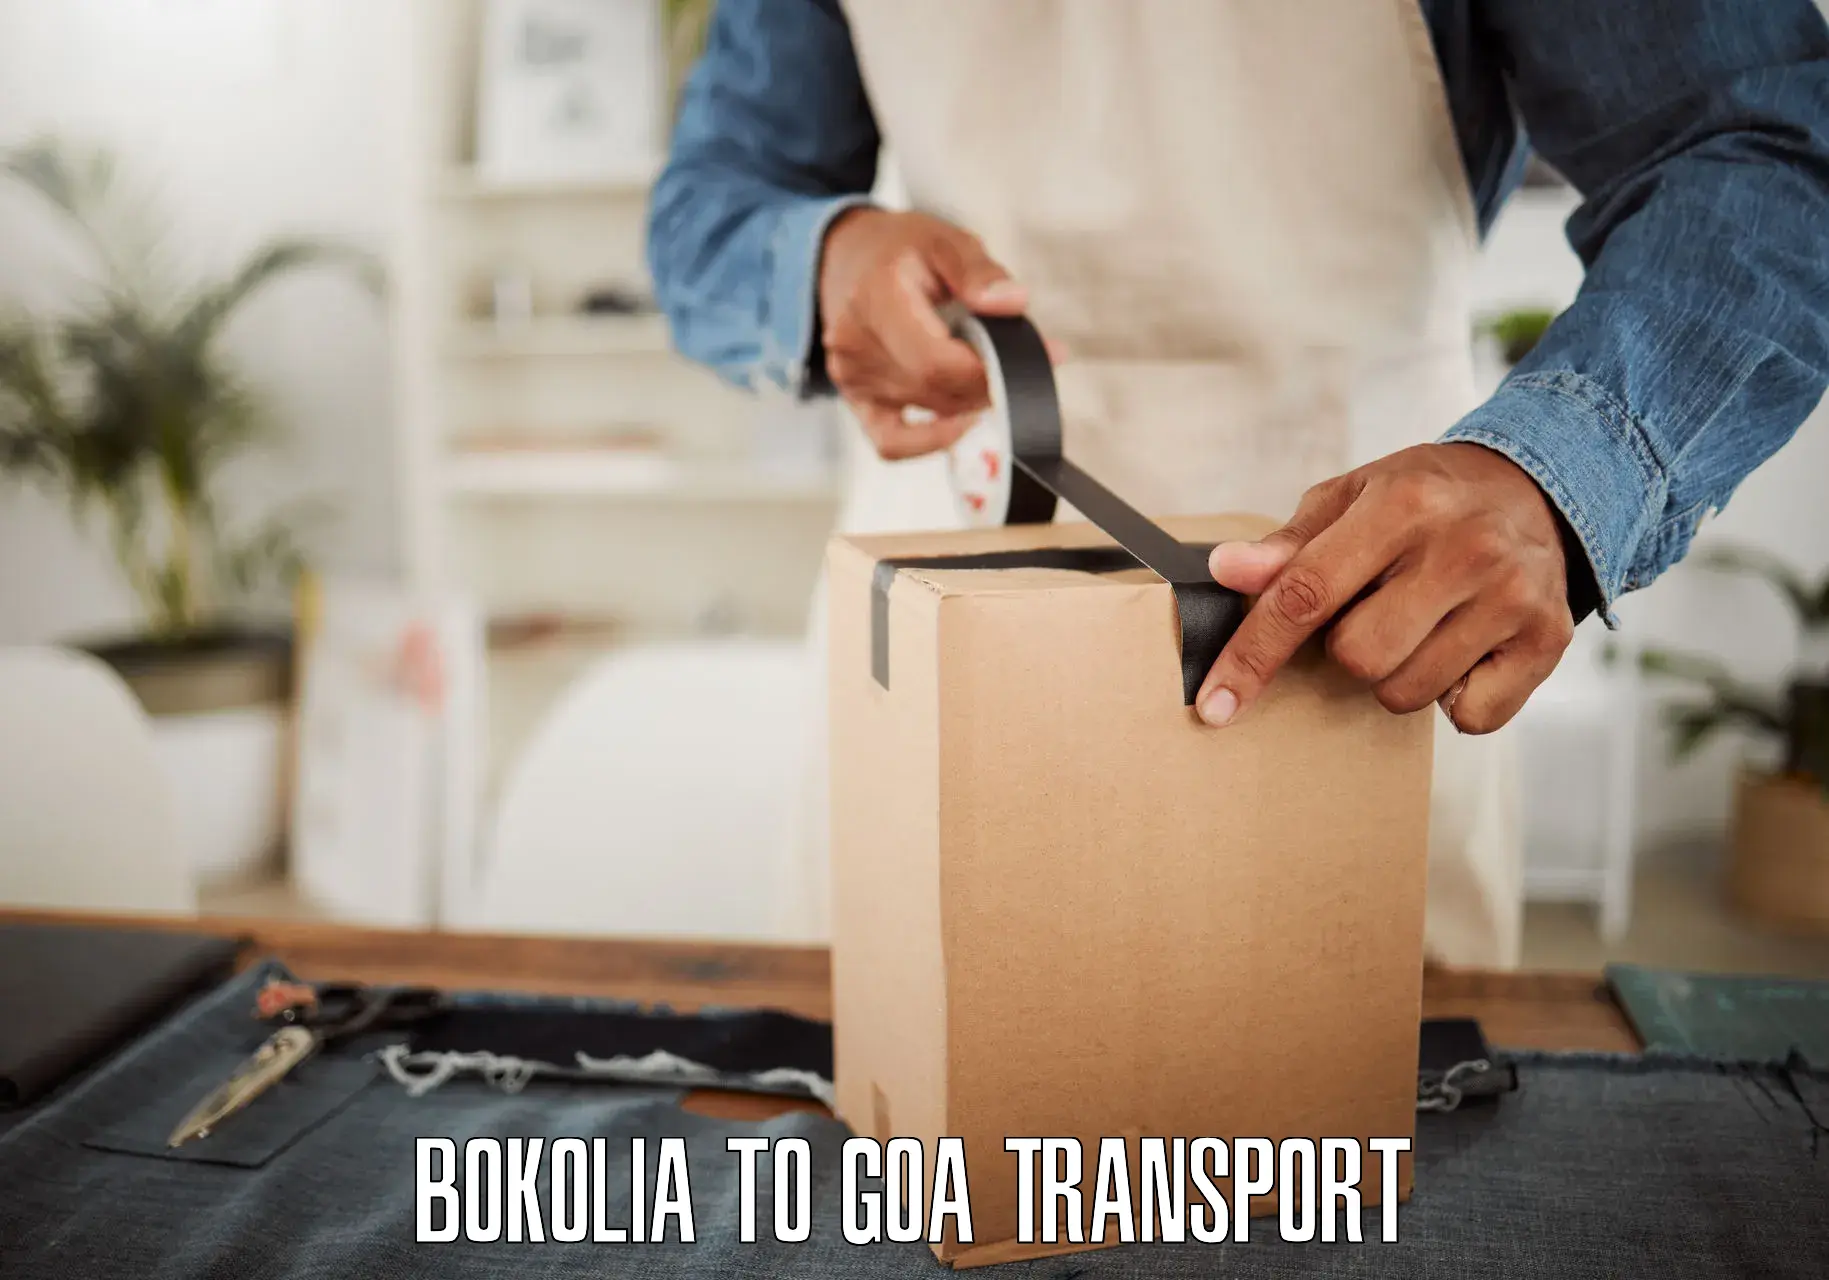 Vehicle transport services in Bokolia to Goa